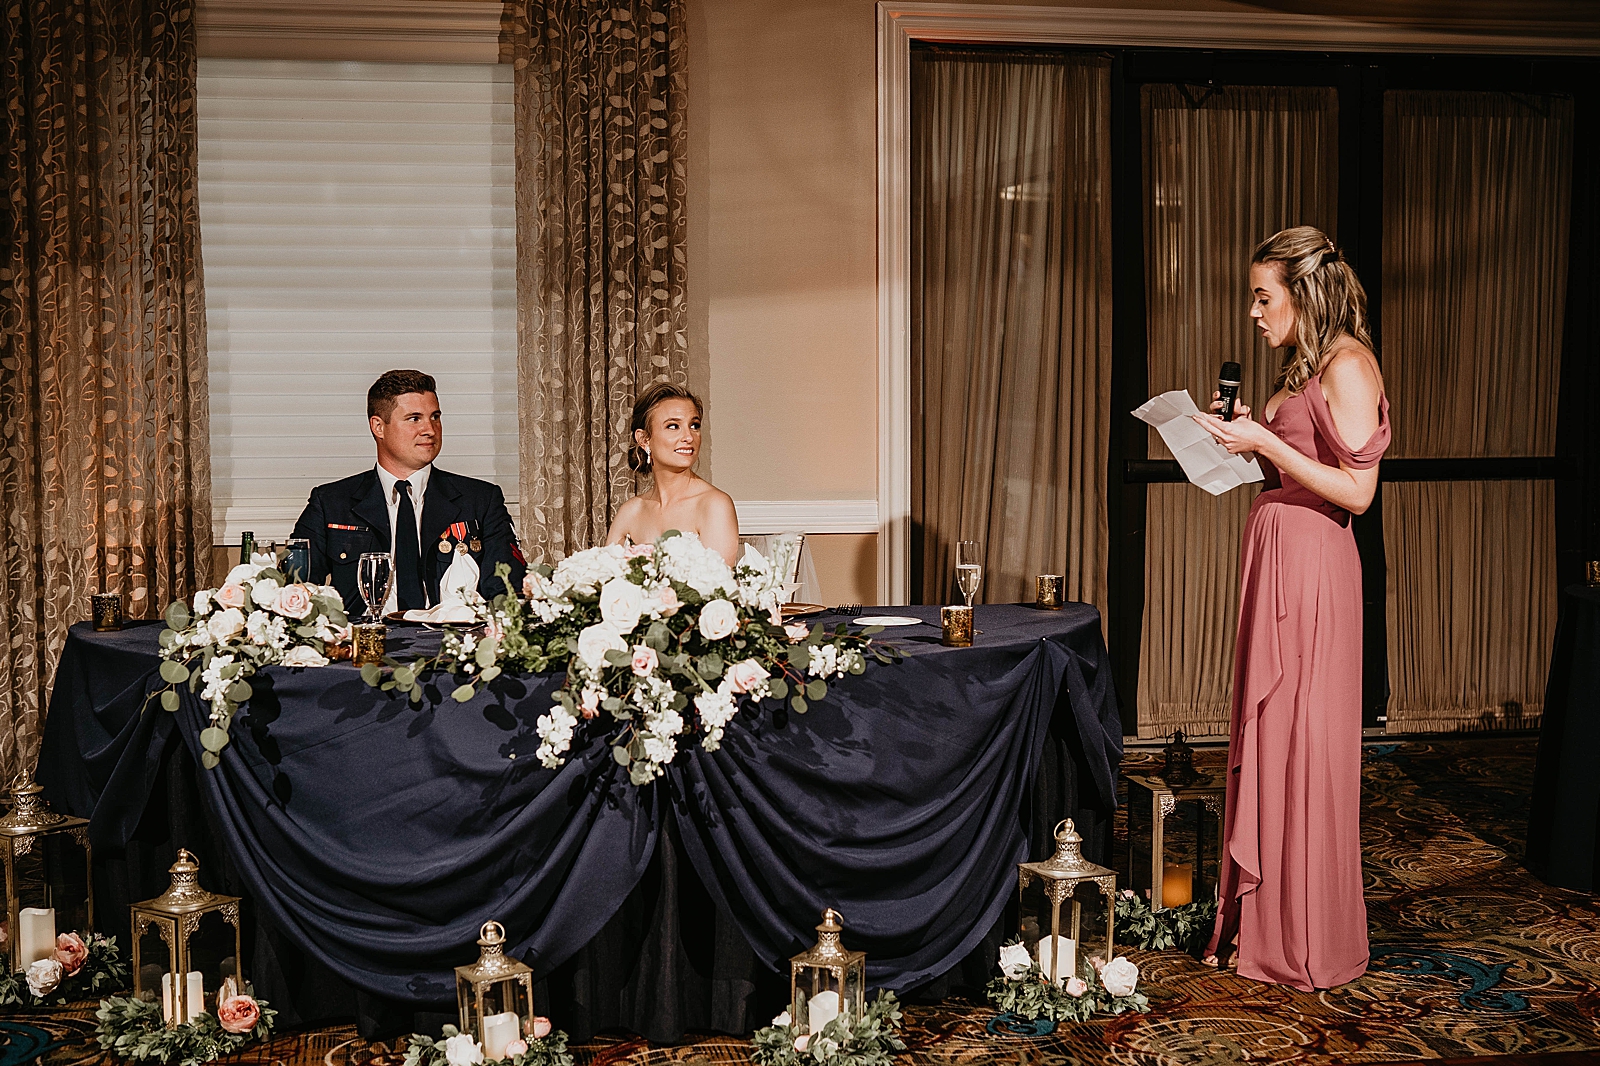 Bride and Groom listening to Maid of Honor Speech at sweetheart table